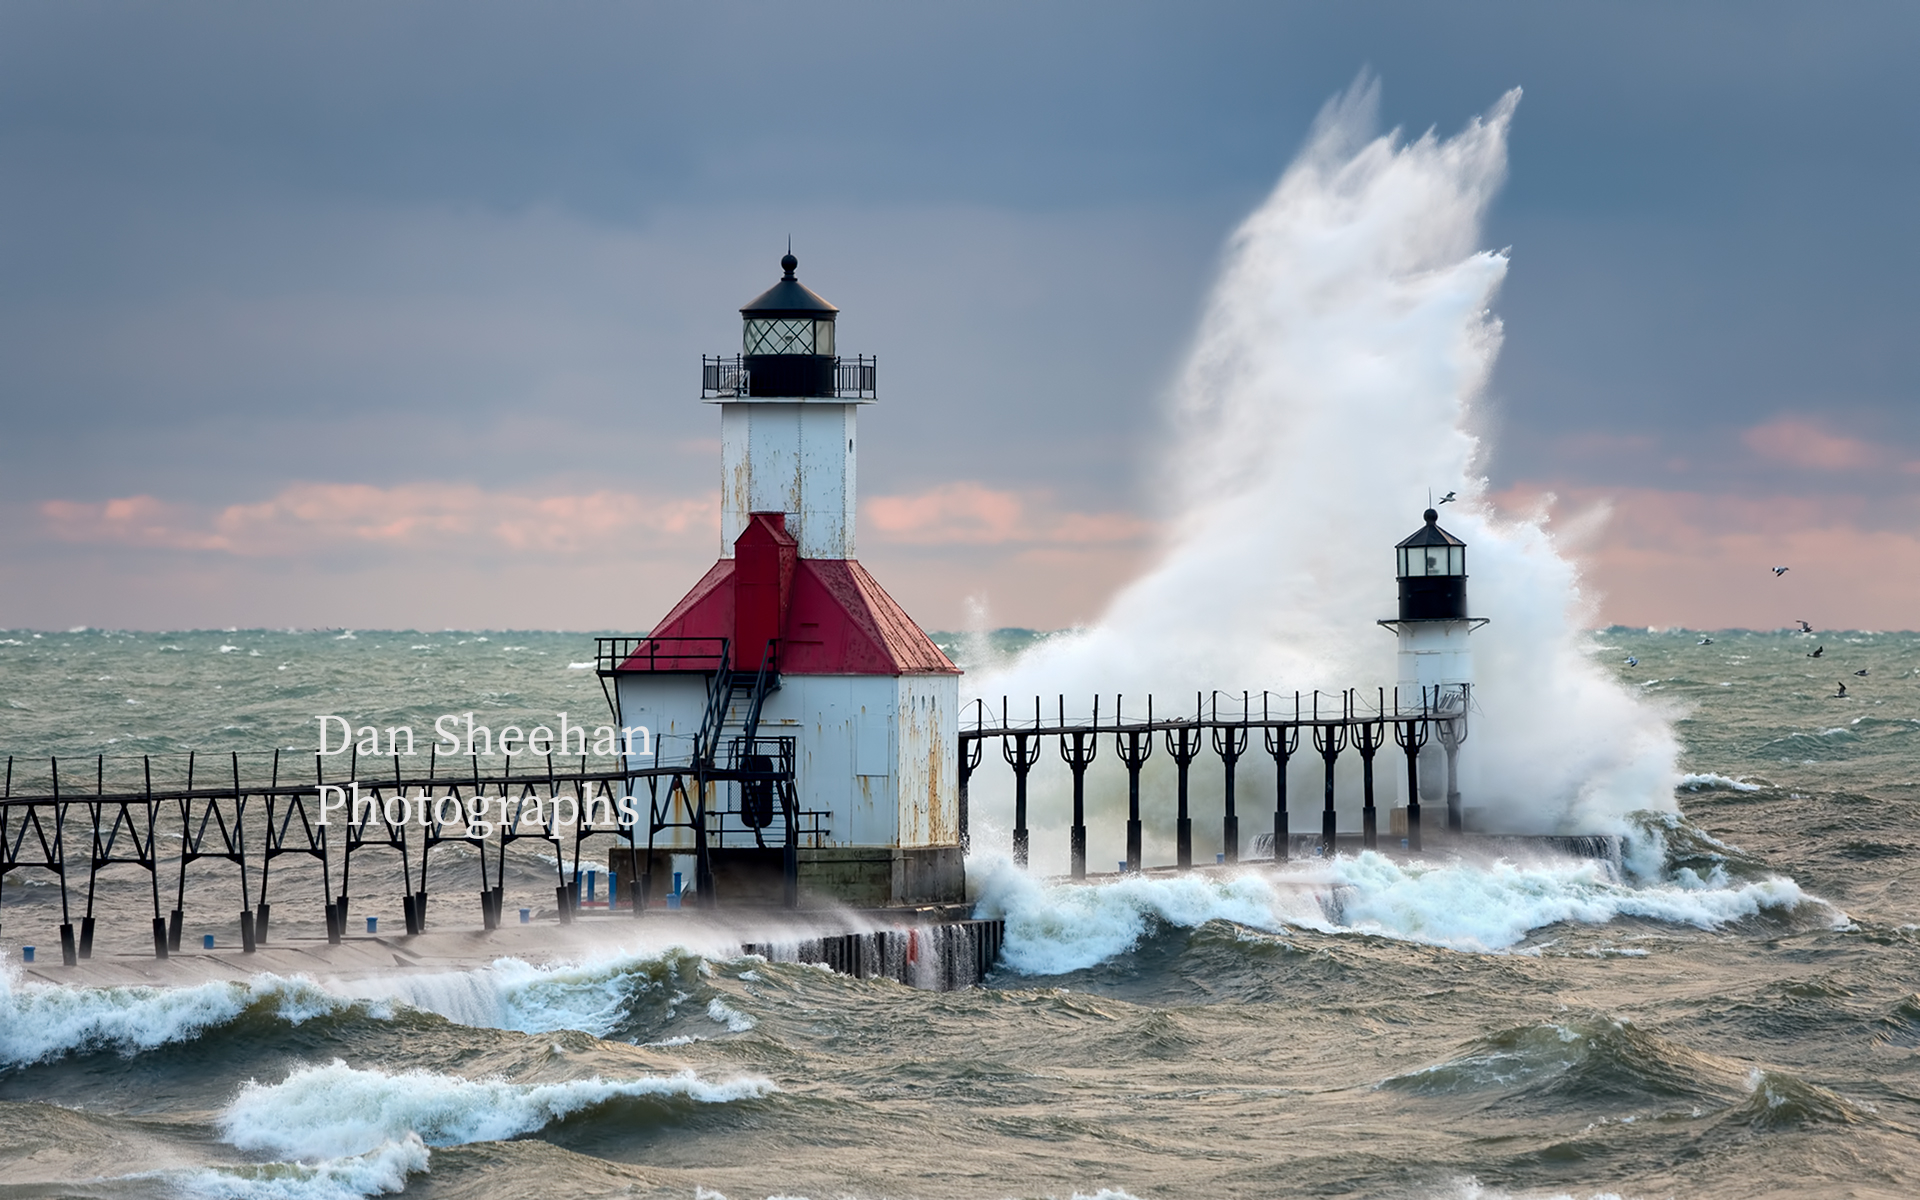 St. Joseph, Michigan lighthouse photographed during a fierce wind storm. This Lighthouse Gallery is under construction. : Lighthouses : Dan Sheehan Photographs - Fine Art Stock Photography